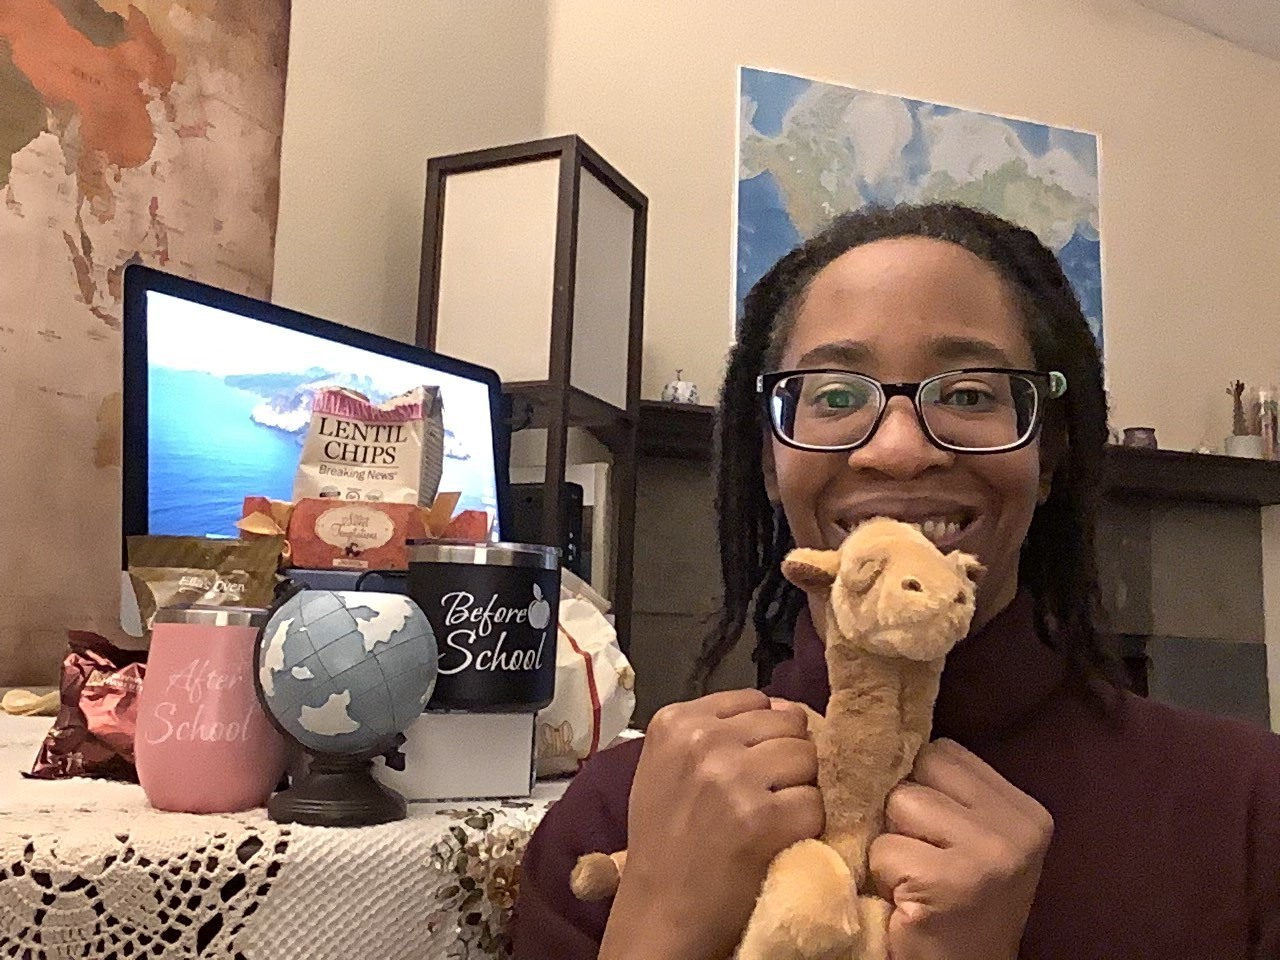 Teacher at desk posing with camel plushie.